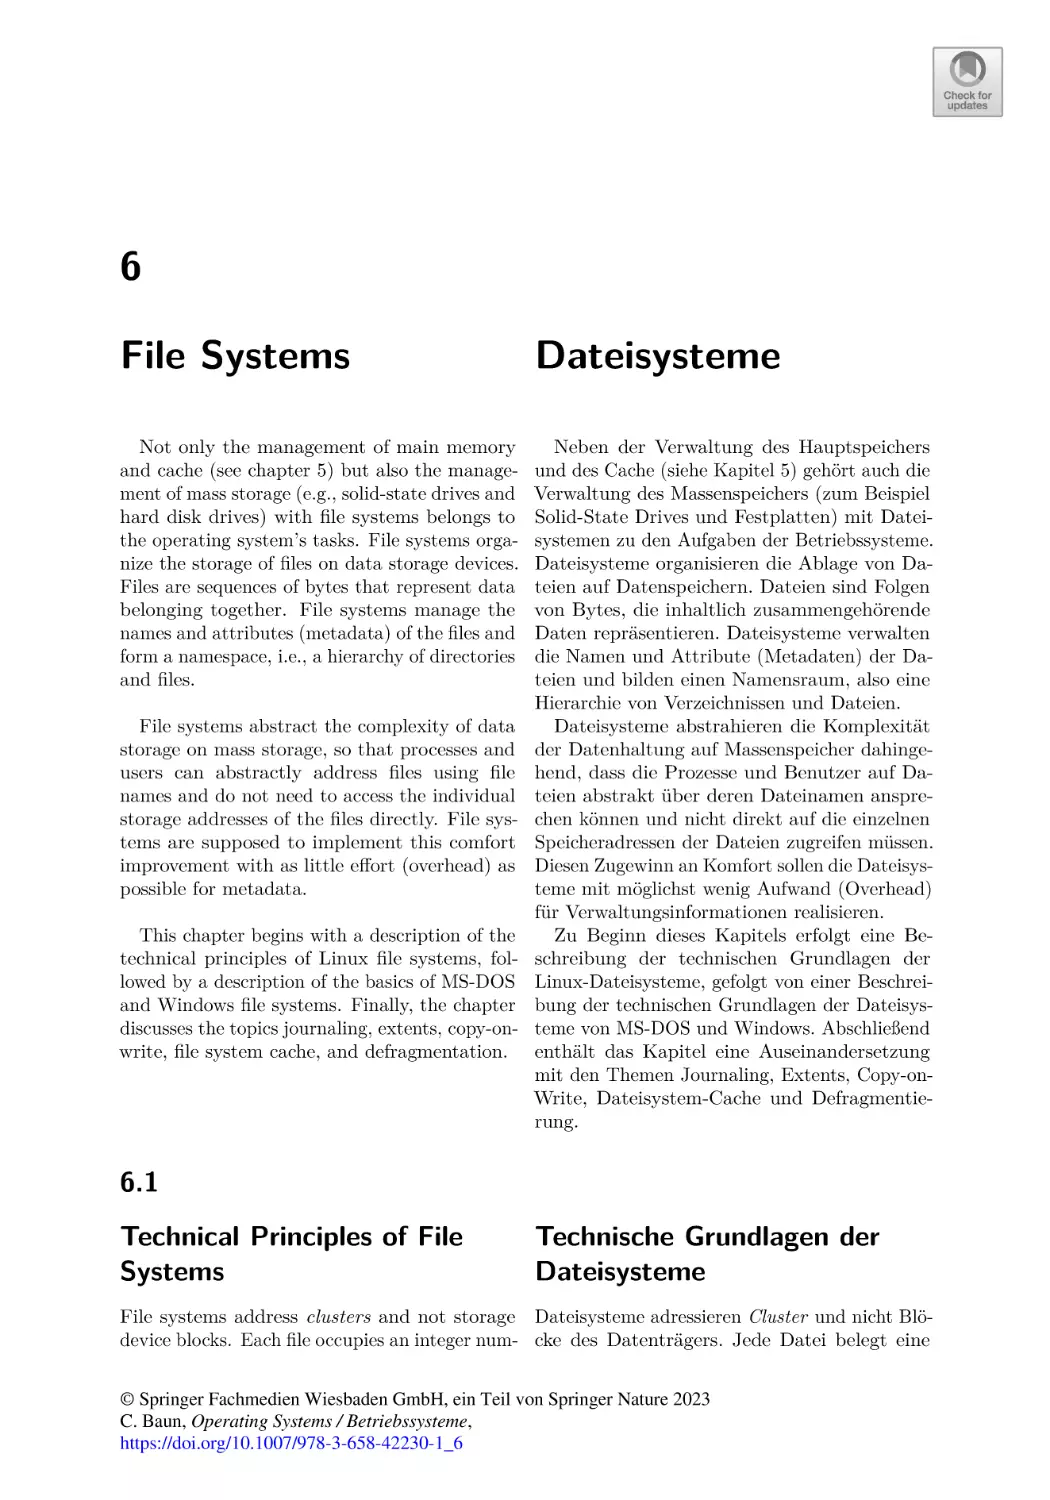 6
File Systems
6.1
Technical Principles of File Systems